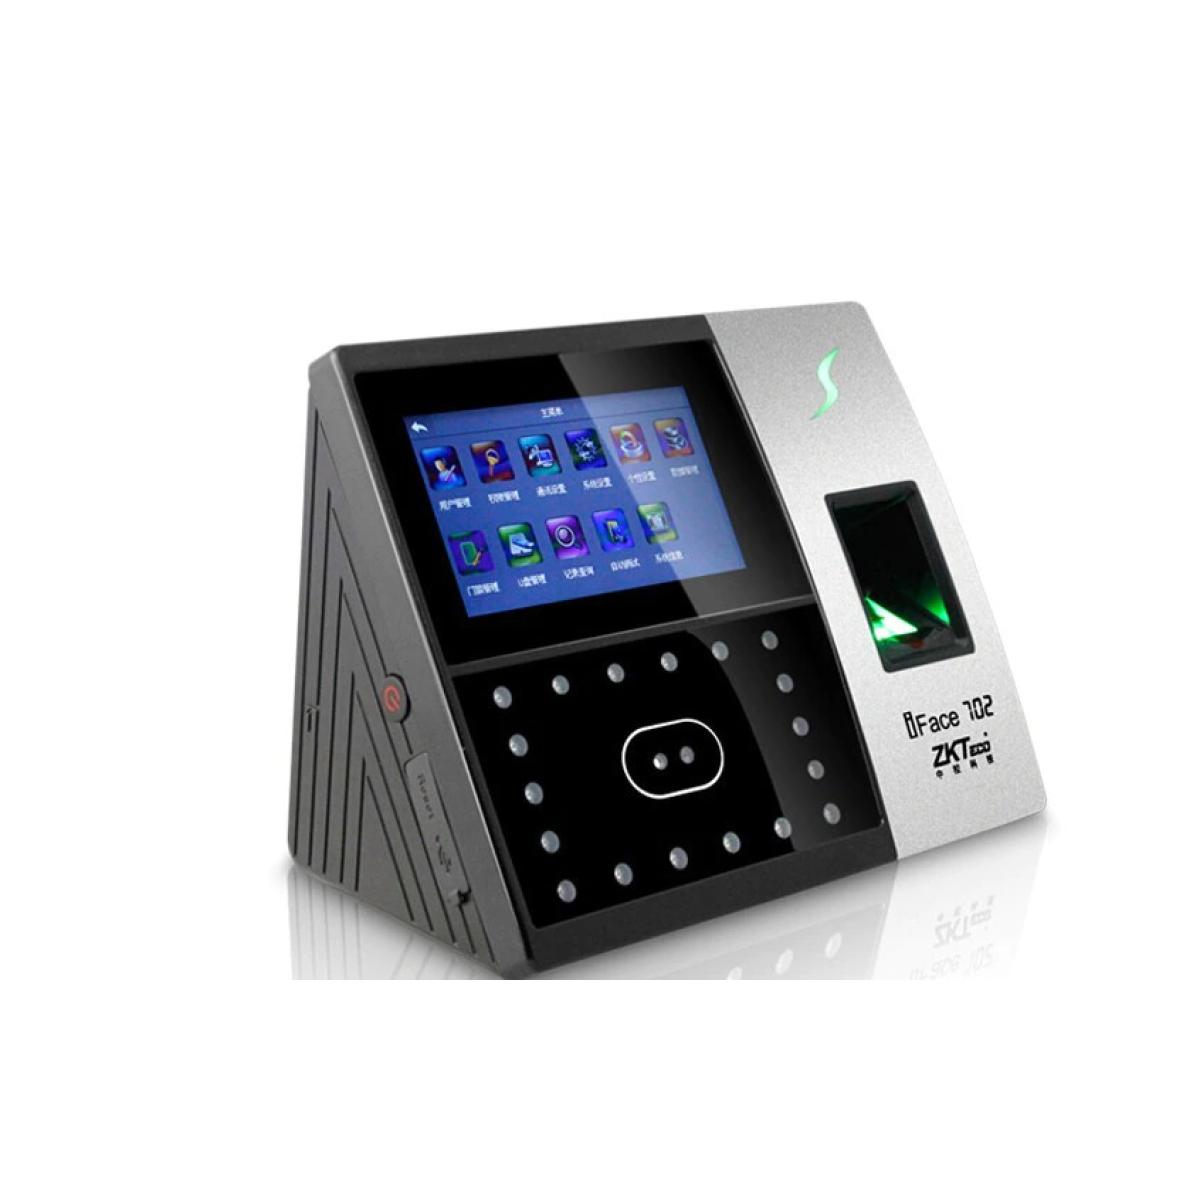 ZKTeco iFace702 Time attendance and Access Control Terminal